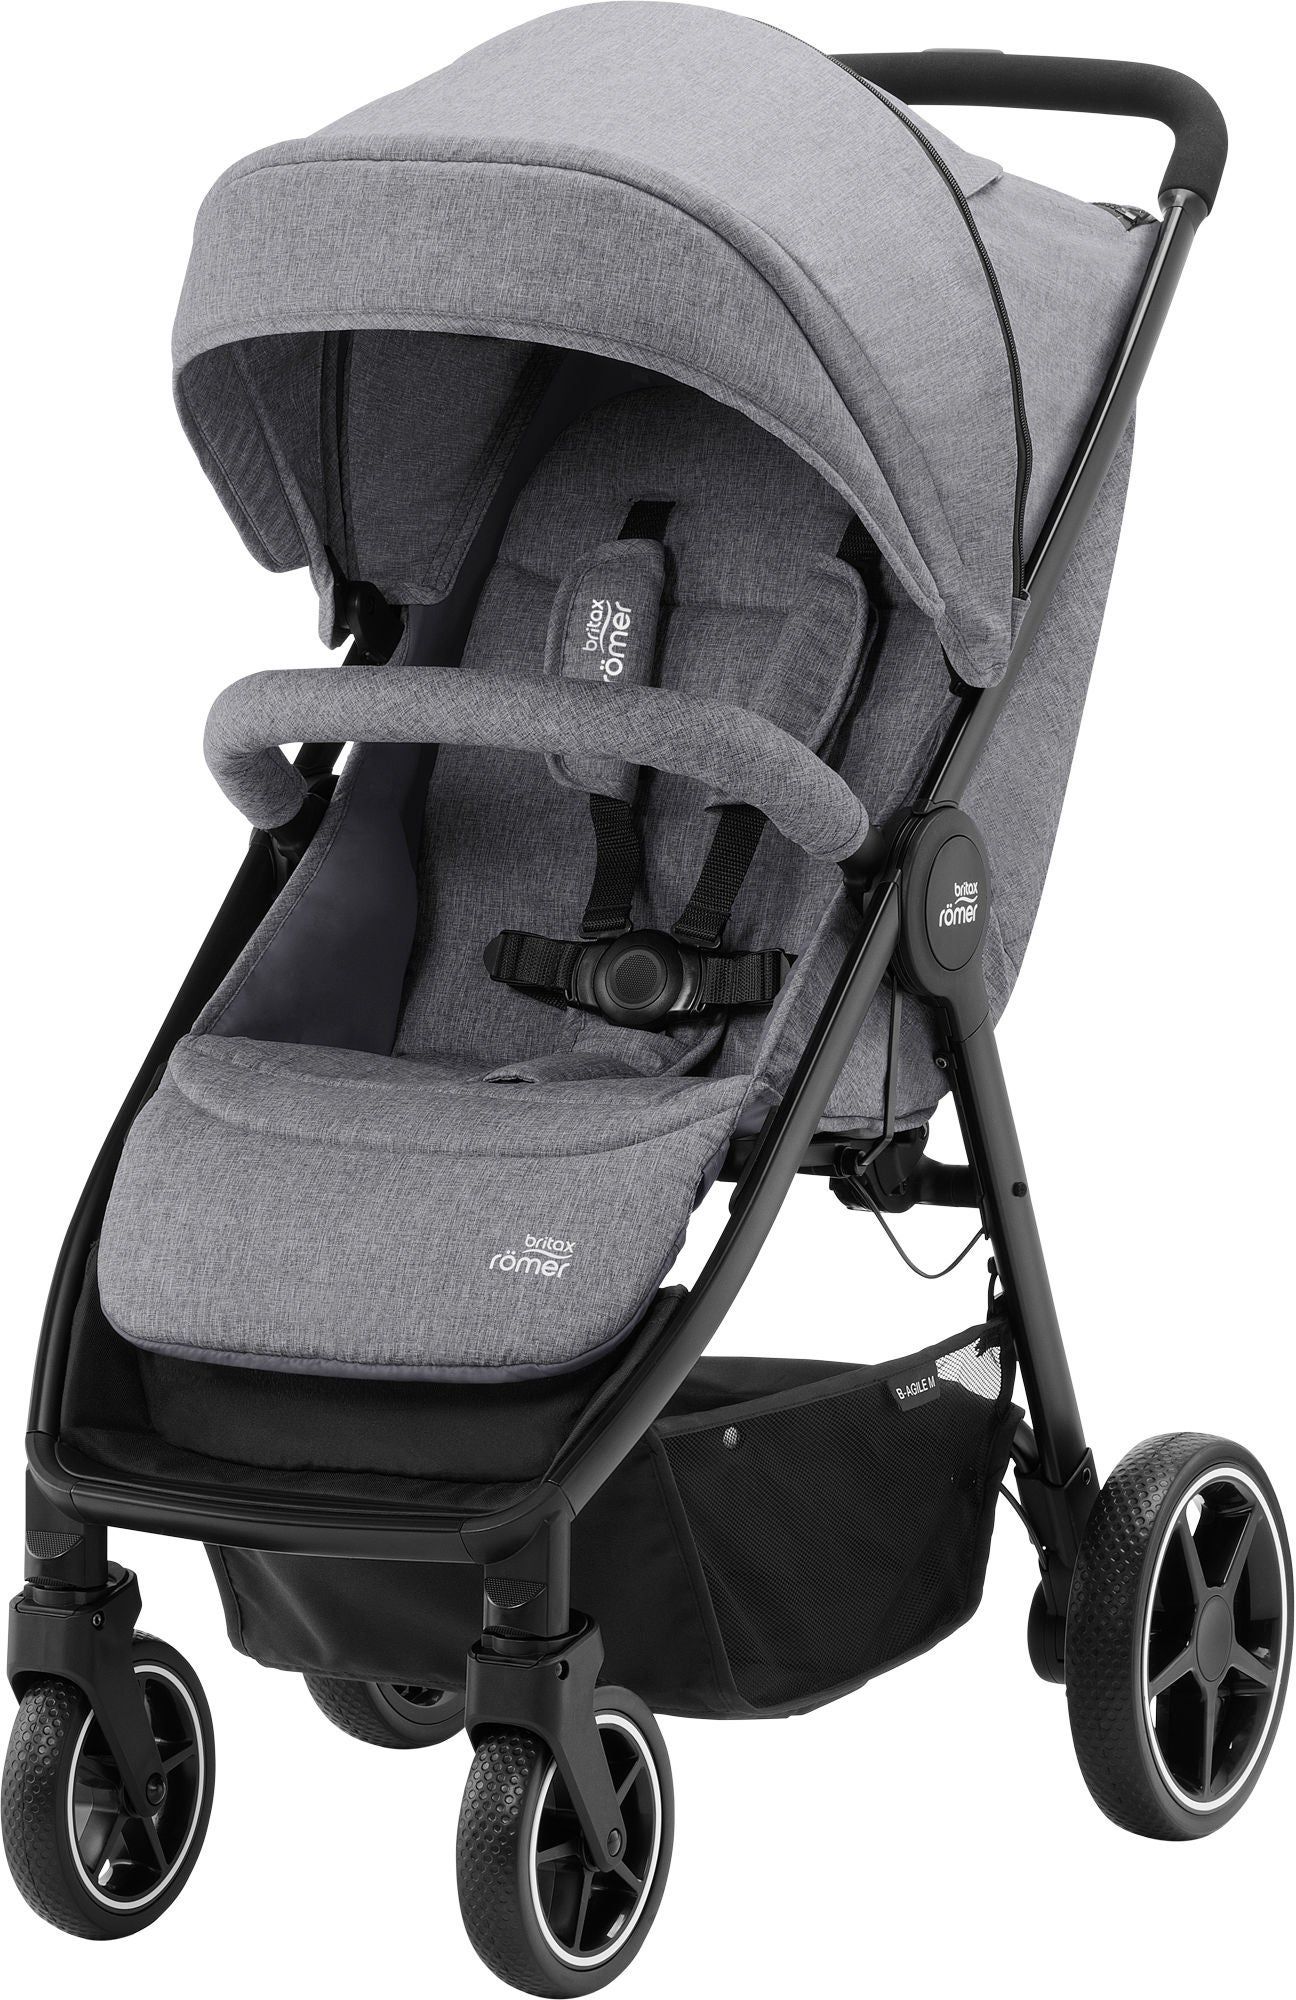 Featured image for “Britax B-Agile M Sittvagn, Elephant Grey”